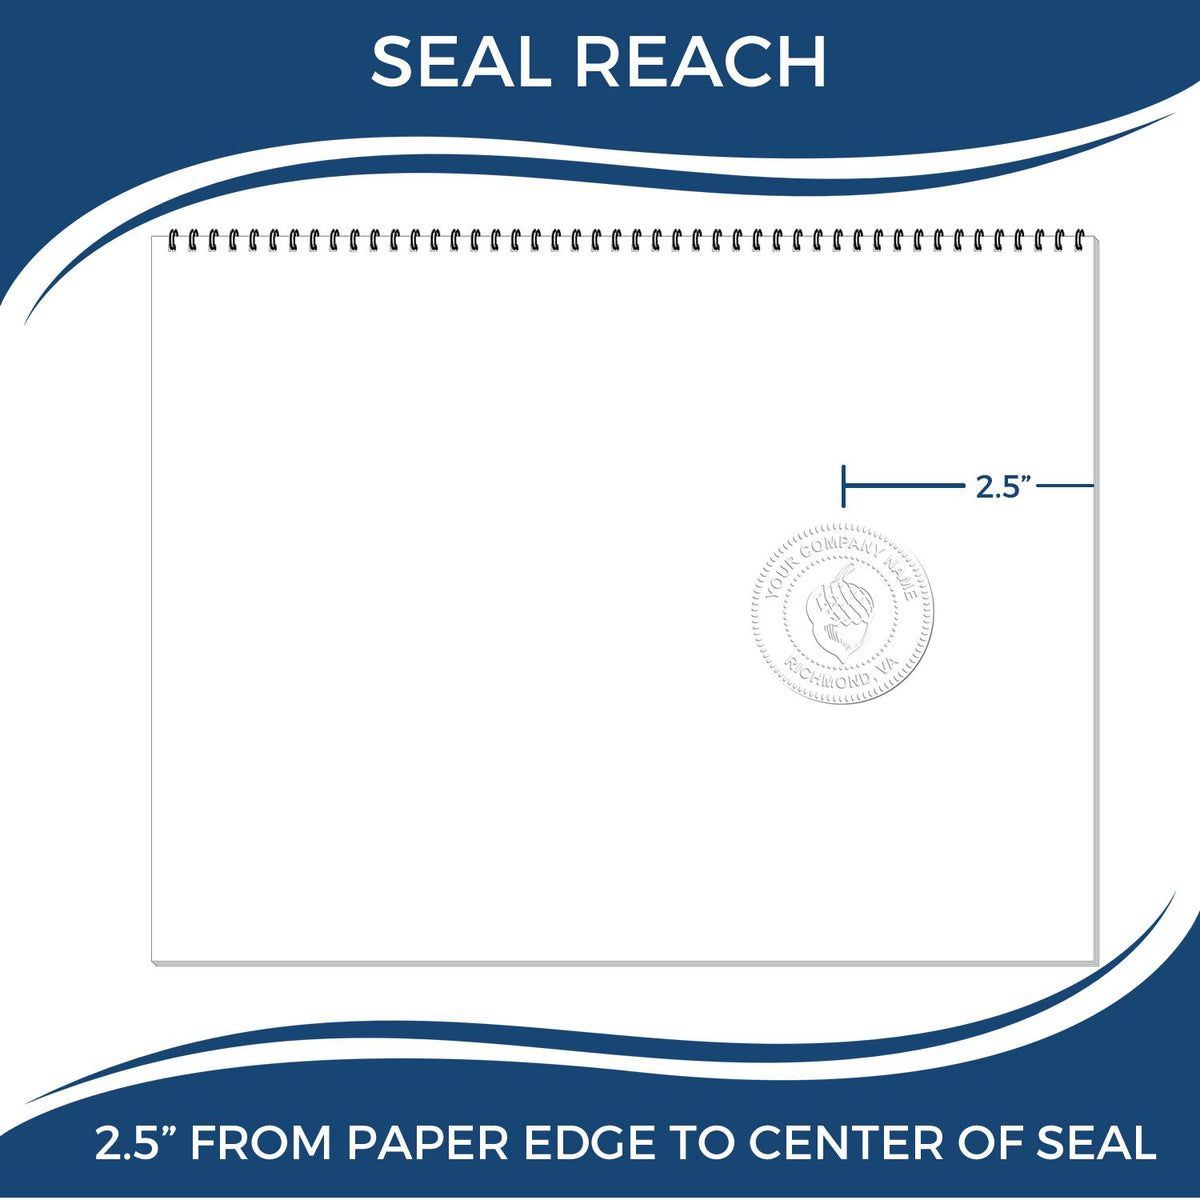 An infographic showing the seal reach which is represented by a ruler and a miniature seal image of the Long Reach Maine Land Surveyor Seal